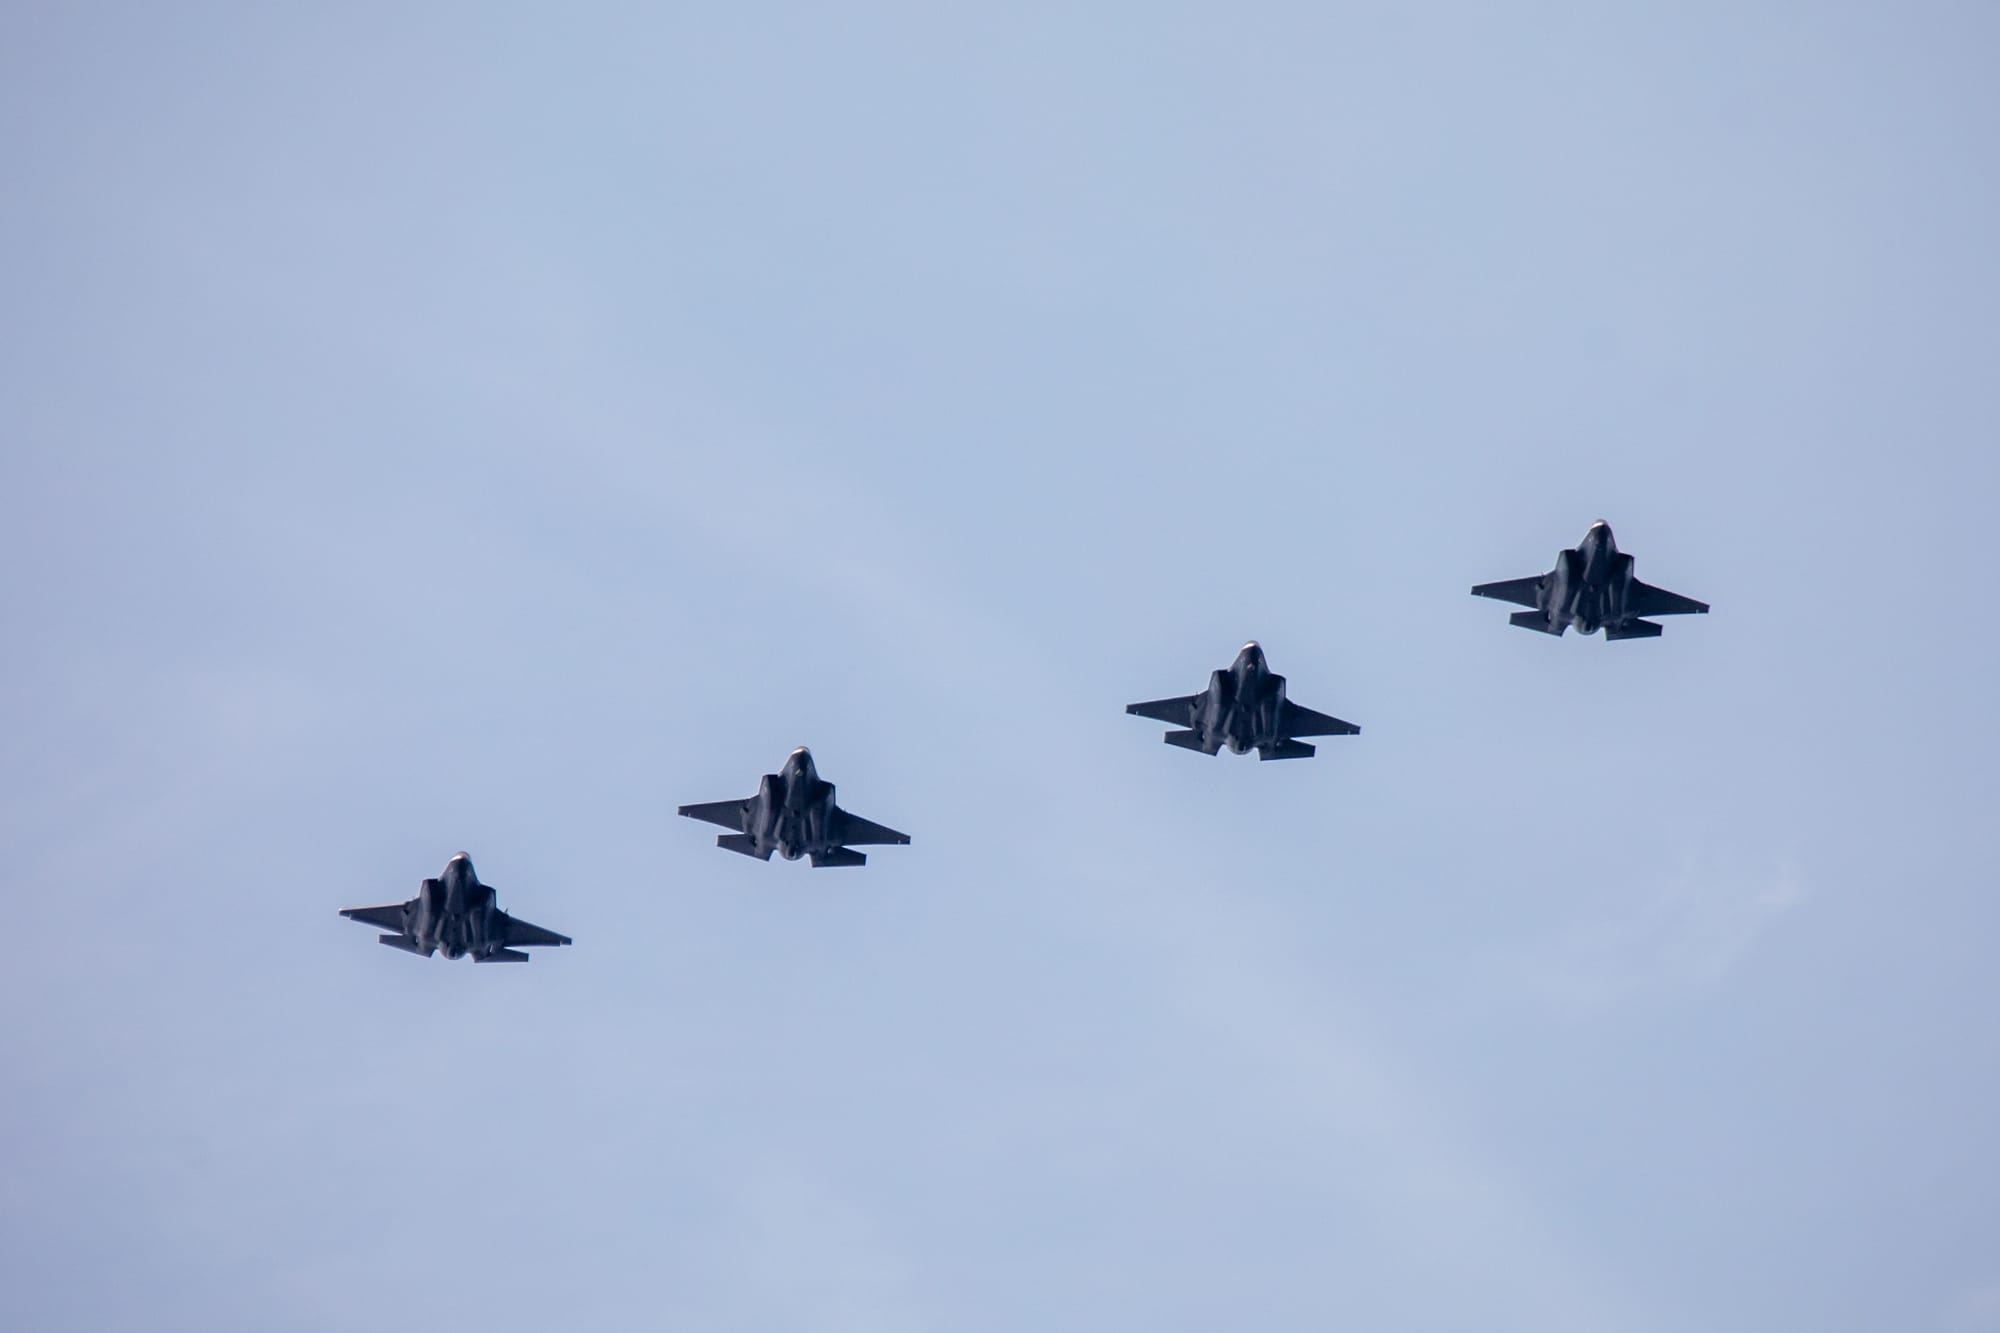 Partners in Northern Europe: the Norwegian and Dutch Air Force